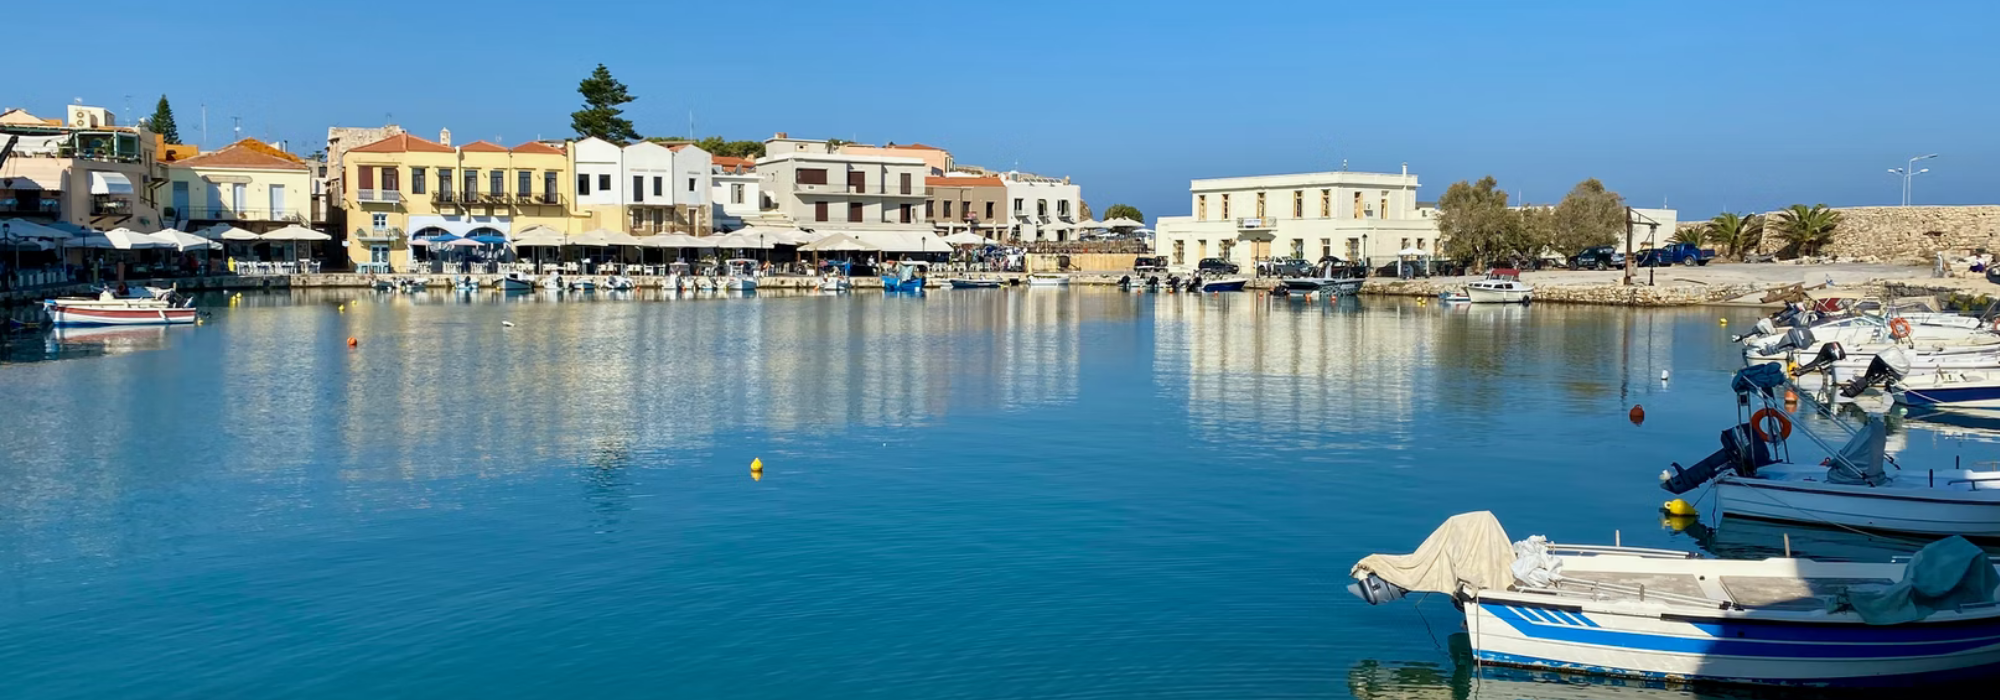 Welcome to Rethymno!